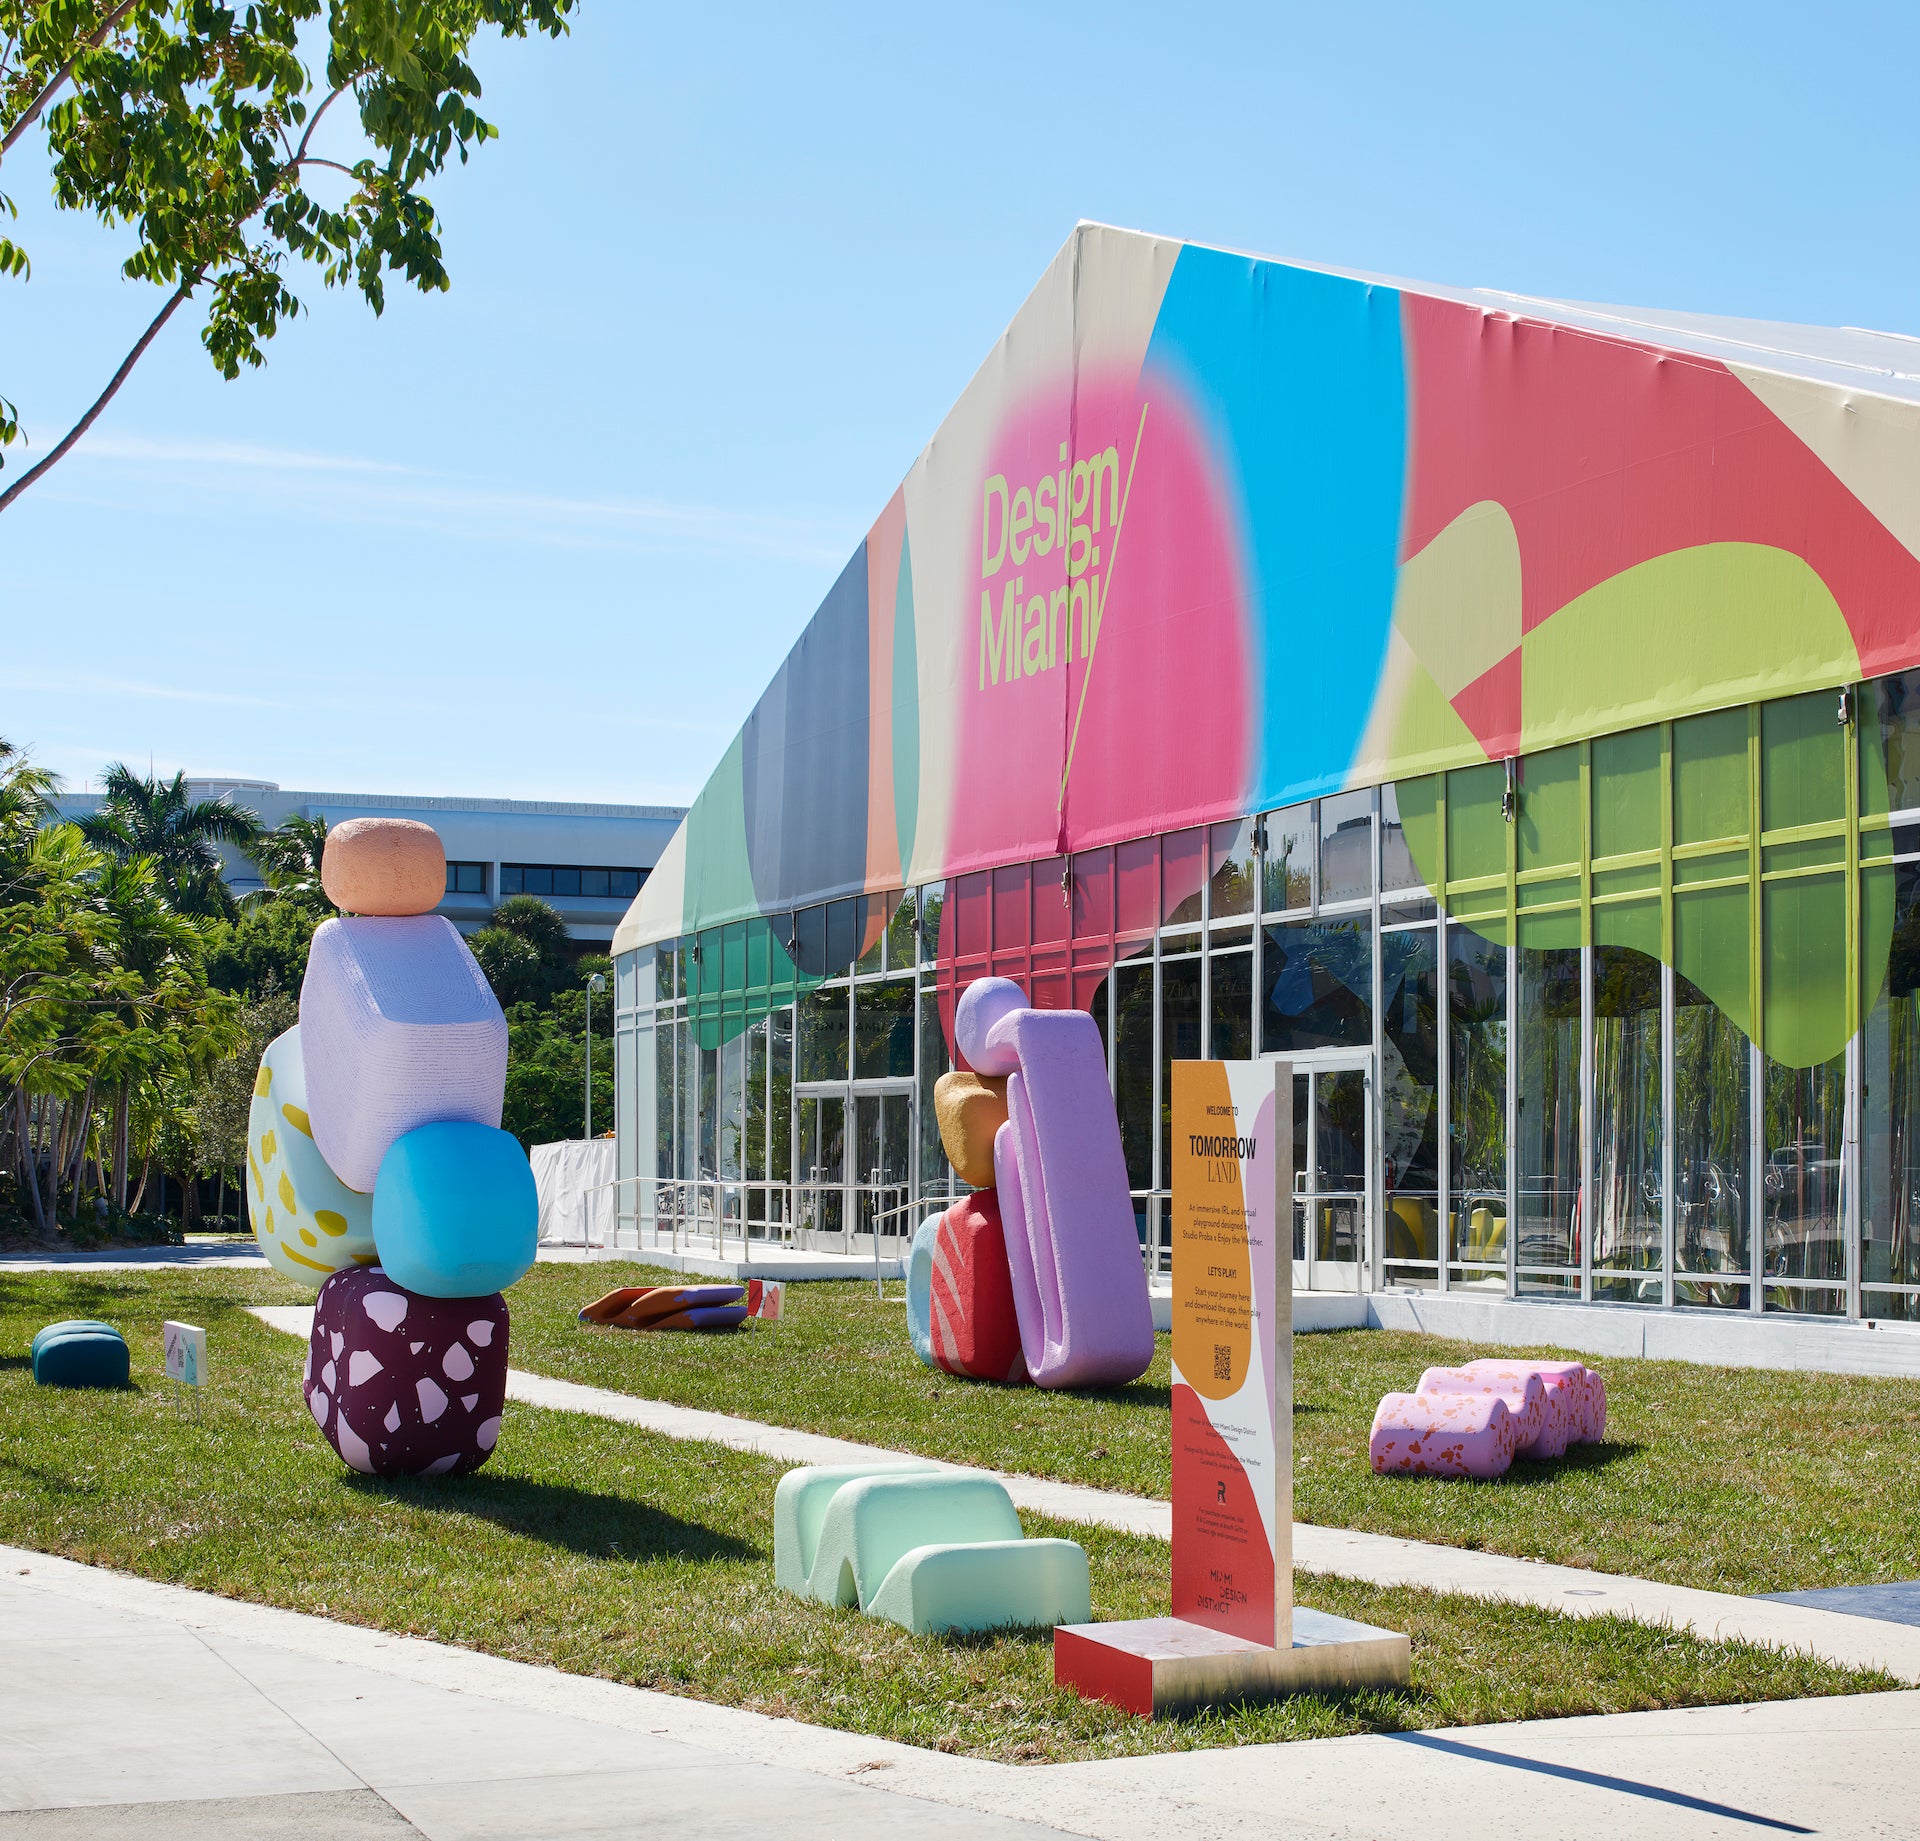 Miami Design District aims to fill in the fair gap with winter